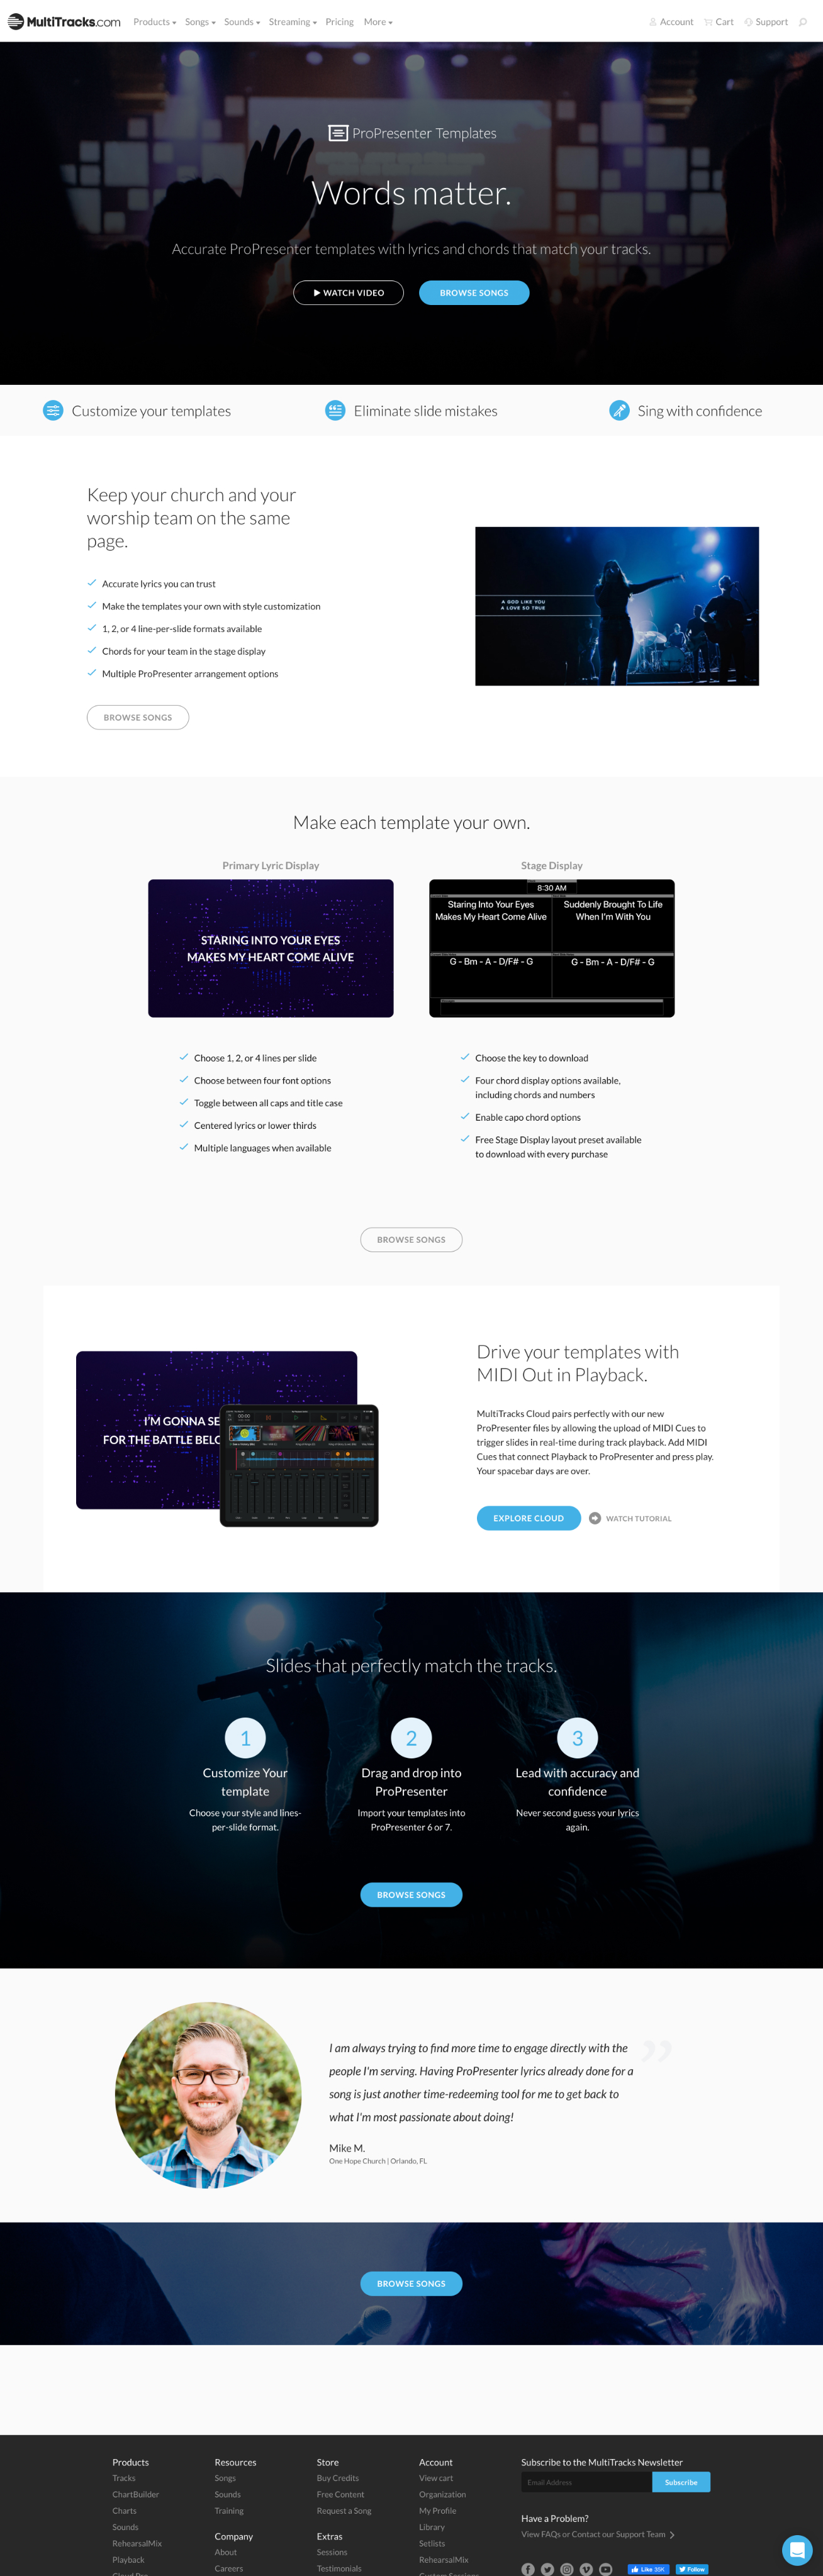 ProPresenter production subscription page